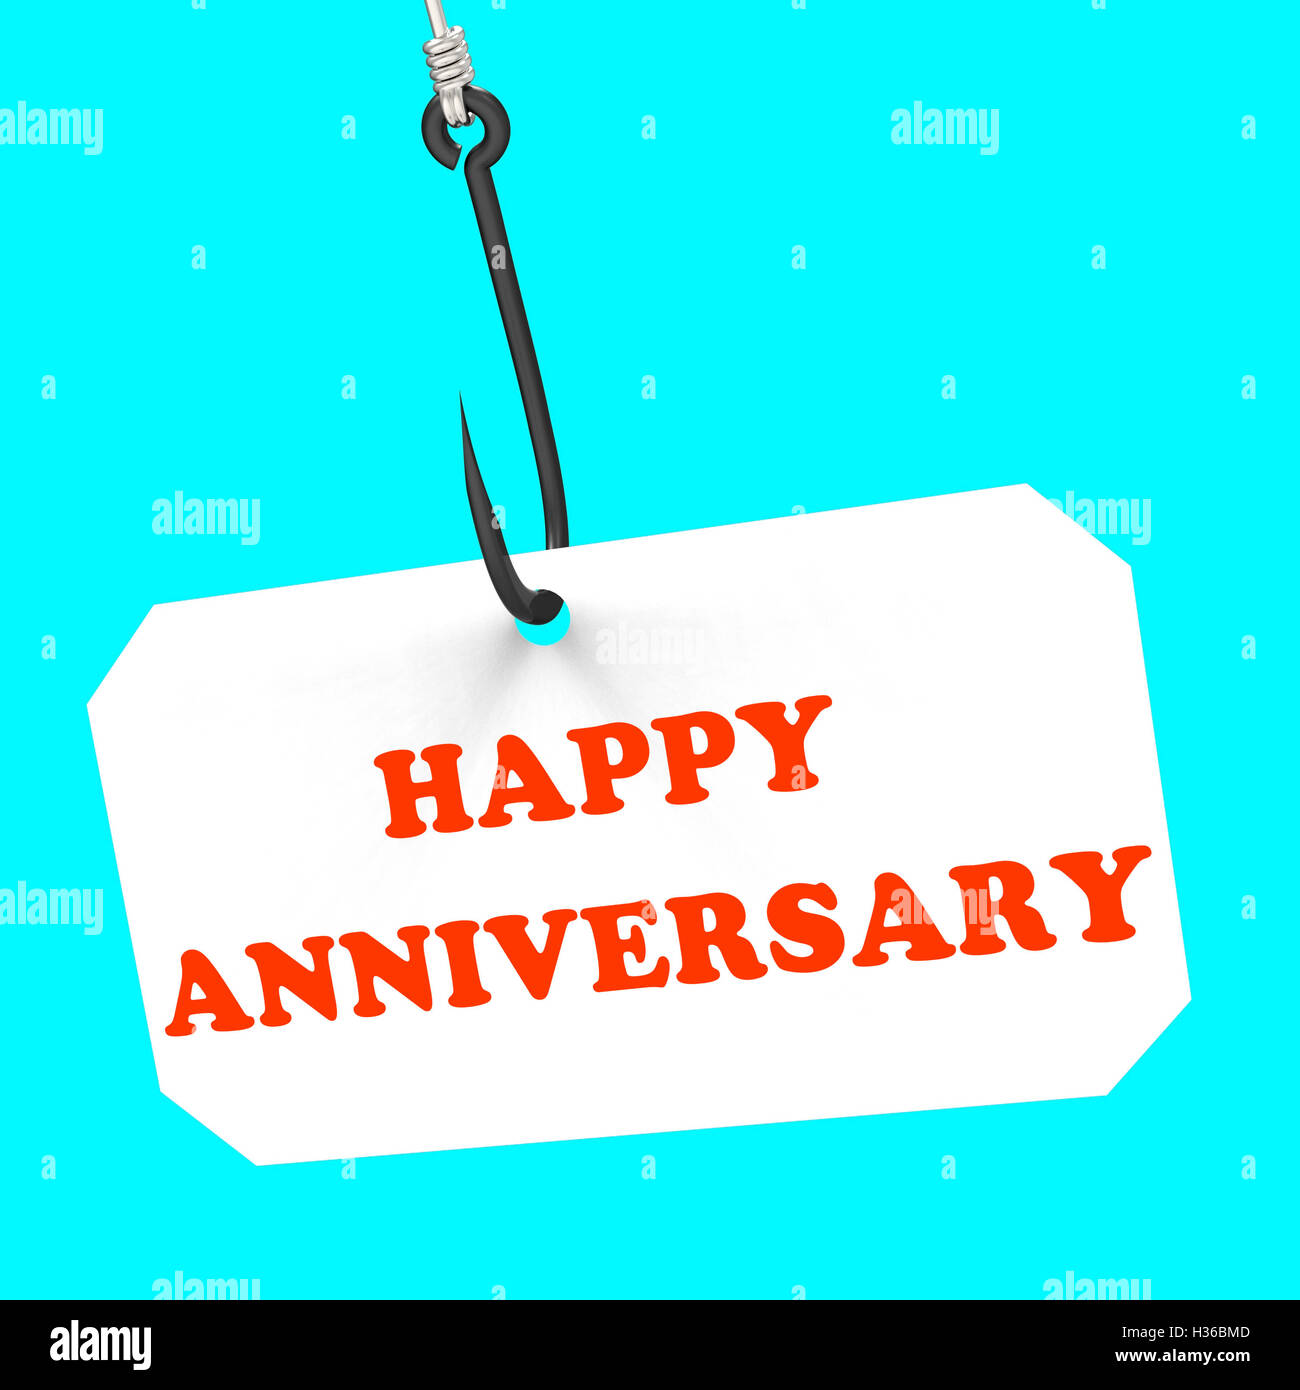 Happy Anniversary On Hook Means Romantic Celebration Or Remembra Stock Photo